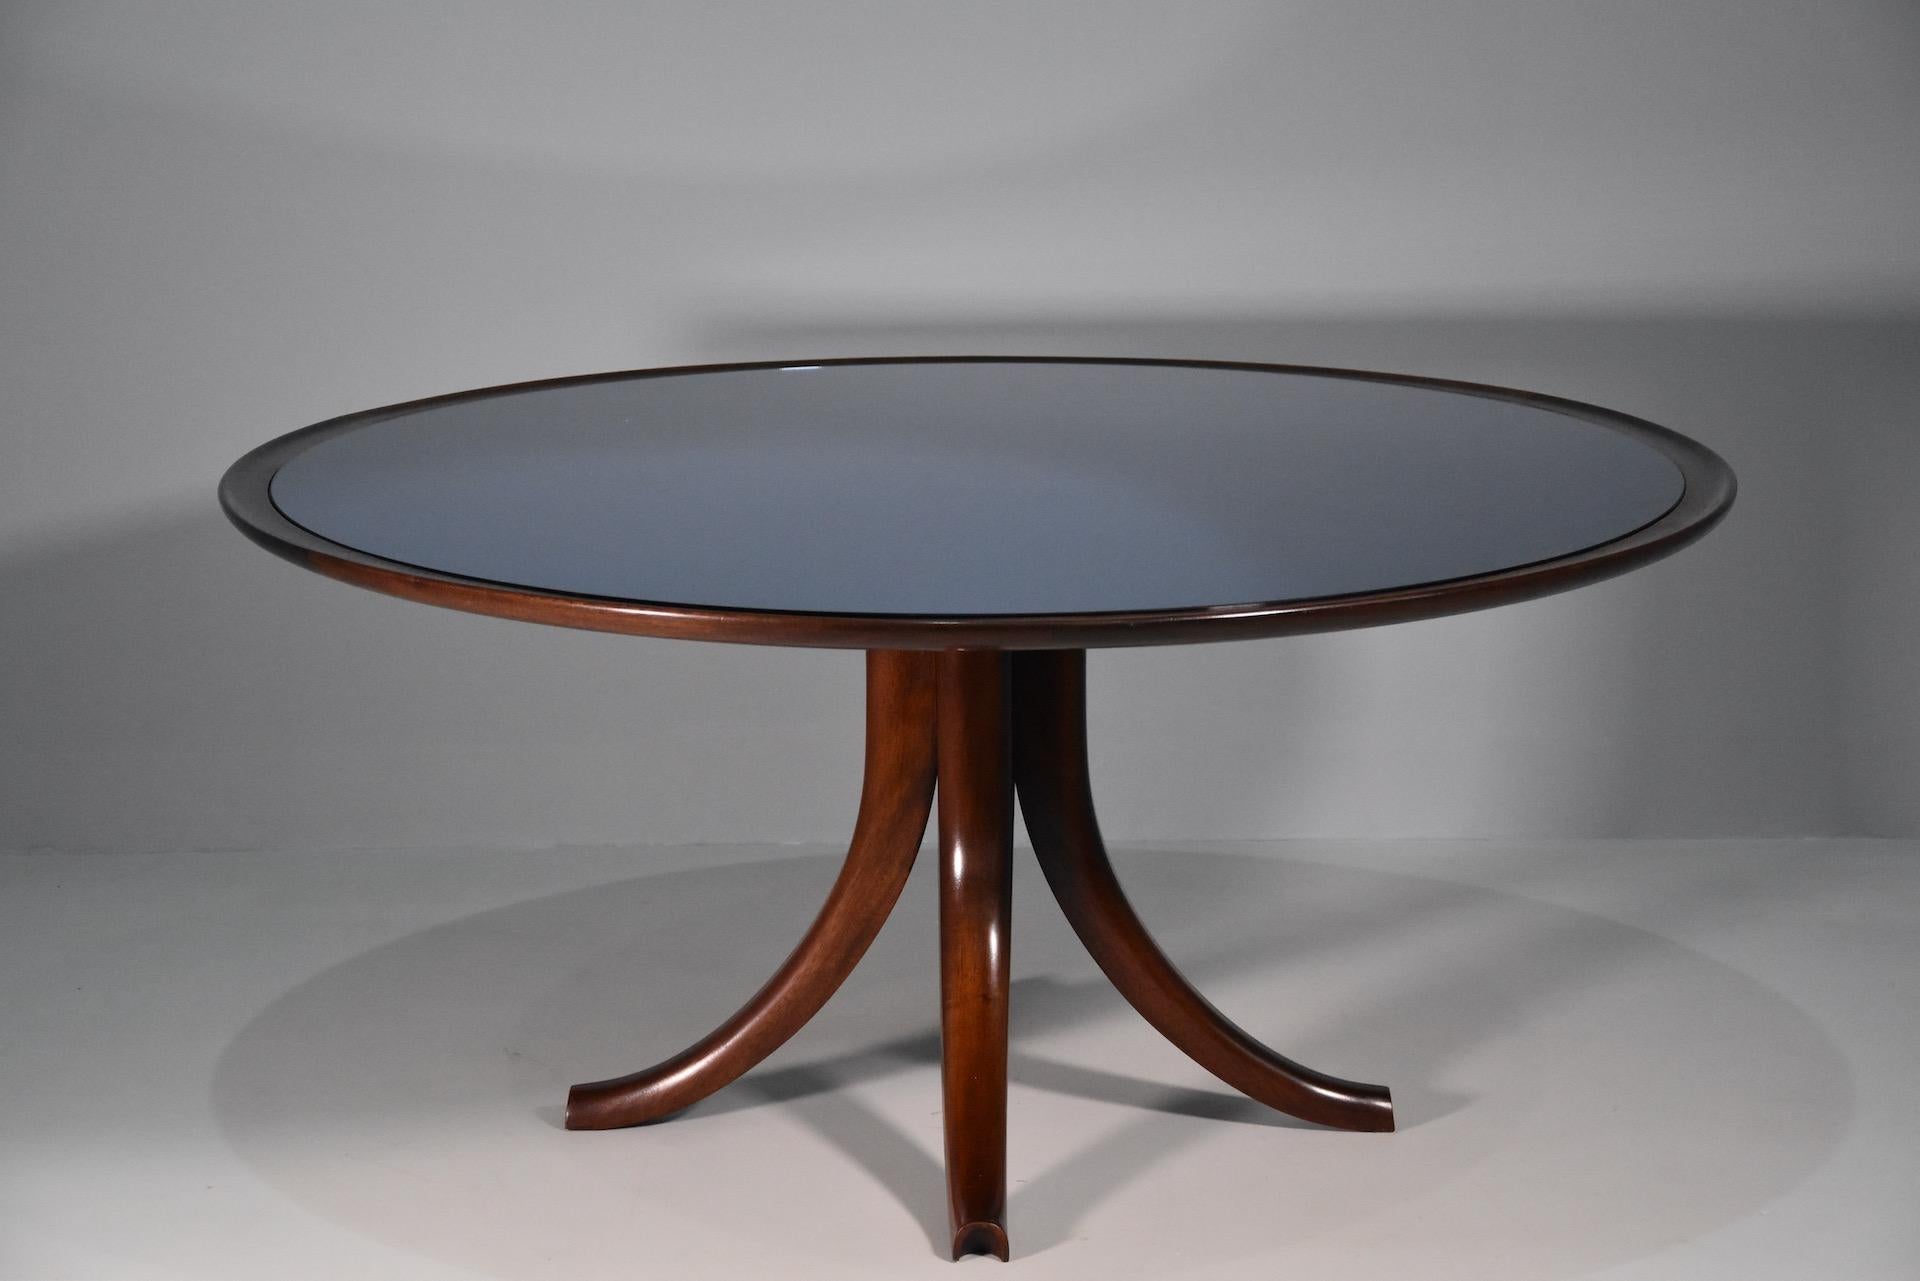 20th Century Rare Variant of Big Table Pietro Chiesa for Fontana Arte 1940 Whit Blue Mirror For Sale